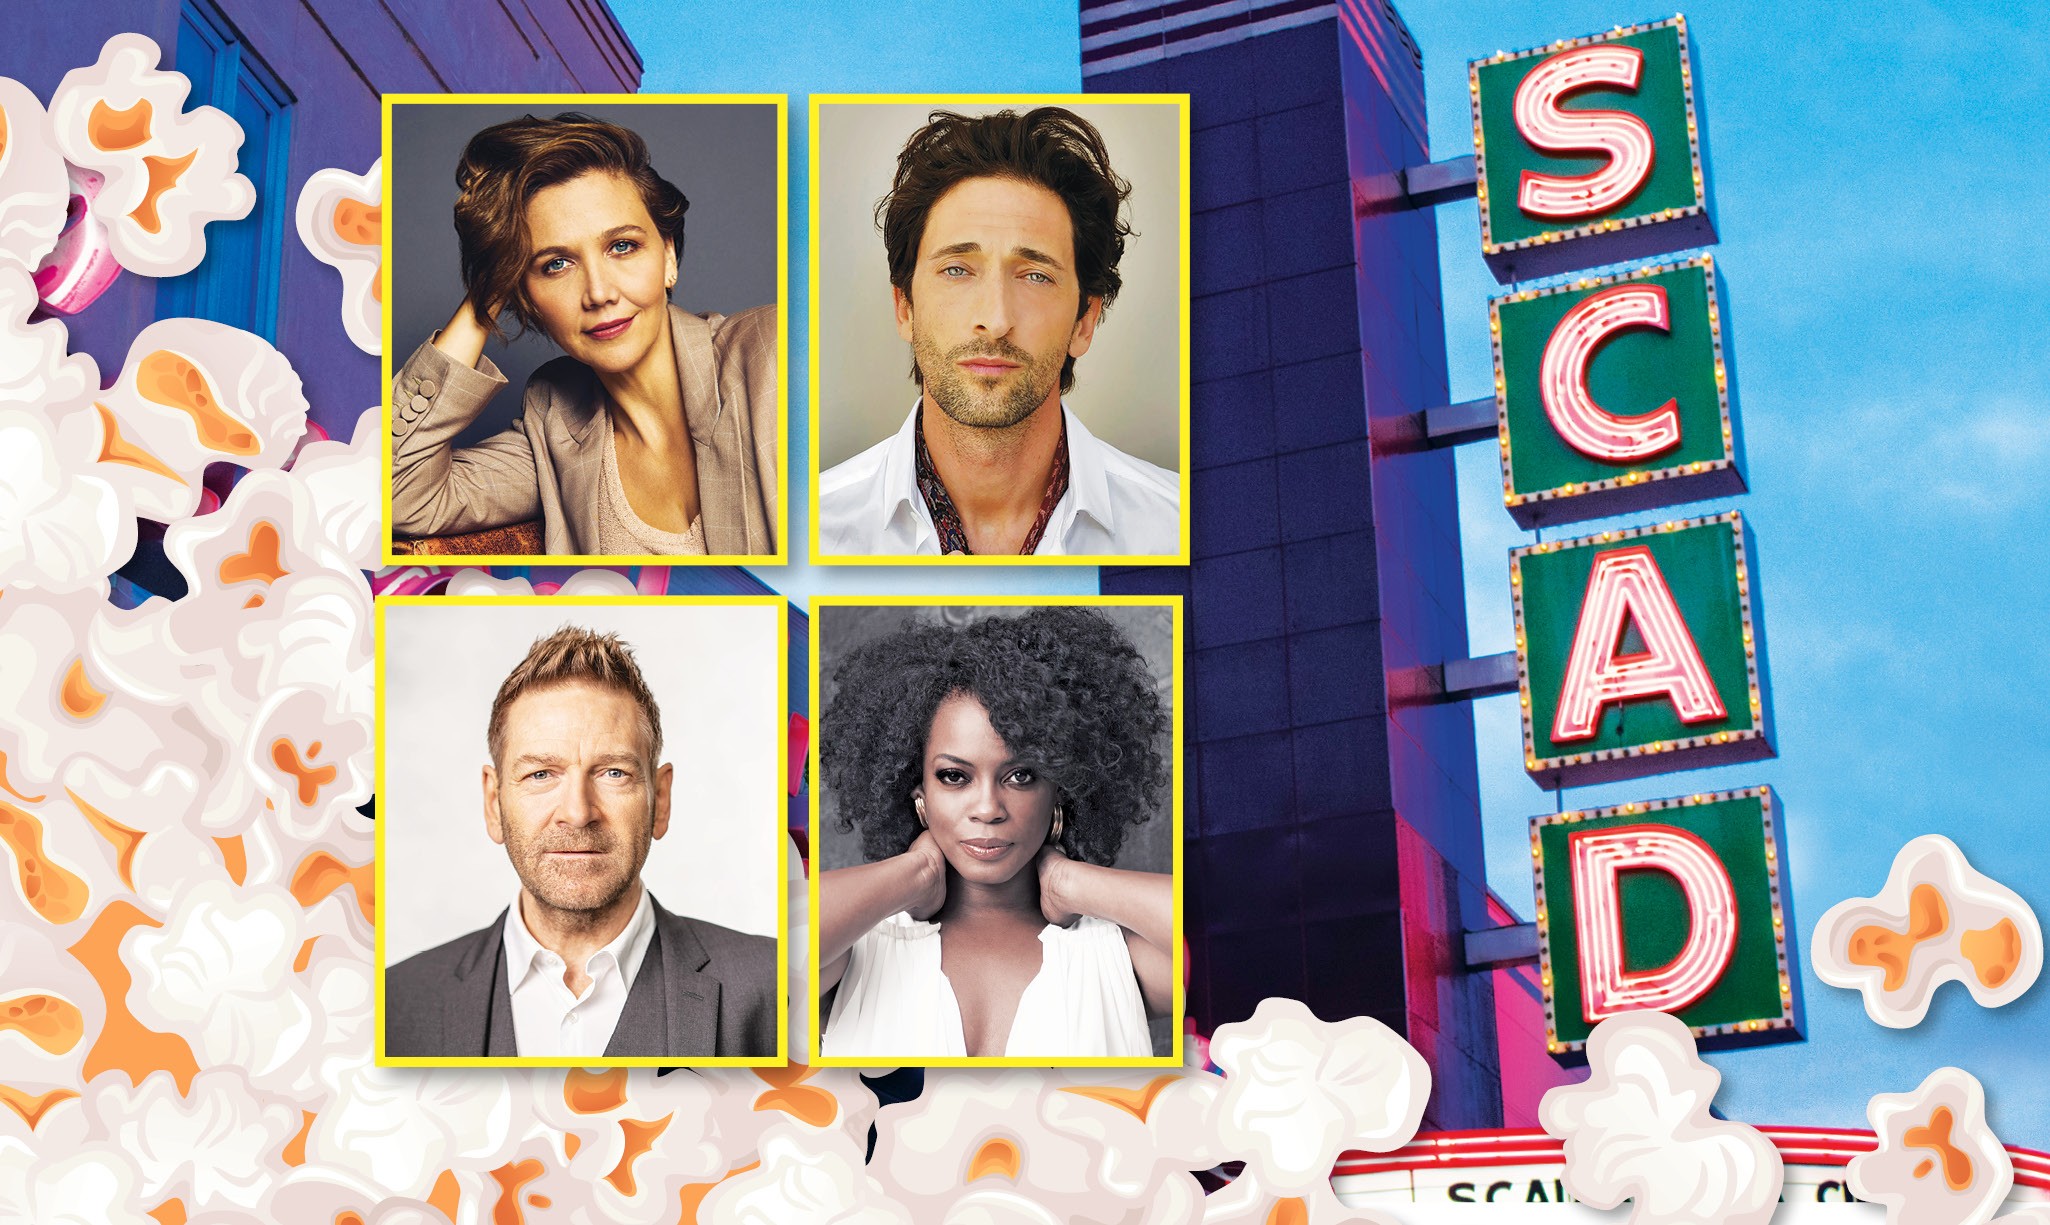 Klemme Med andre ord Vanære SCAD announces schedule and star-studded line up for the 24th SCAD Savannah  Film Festival | Community | Savannah News, Events, Restaurants, Music |  Connect Savannah